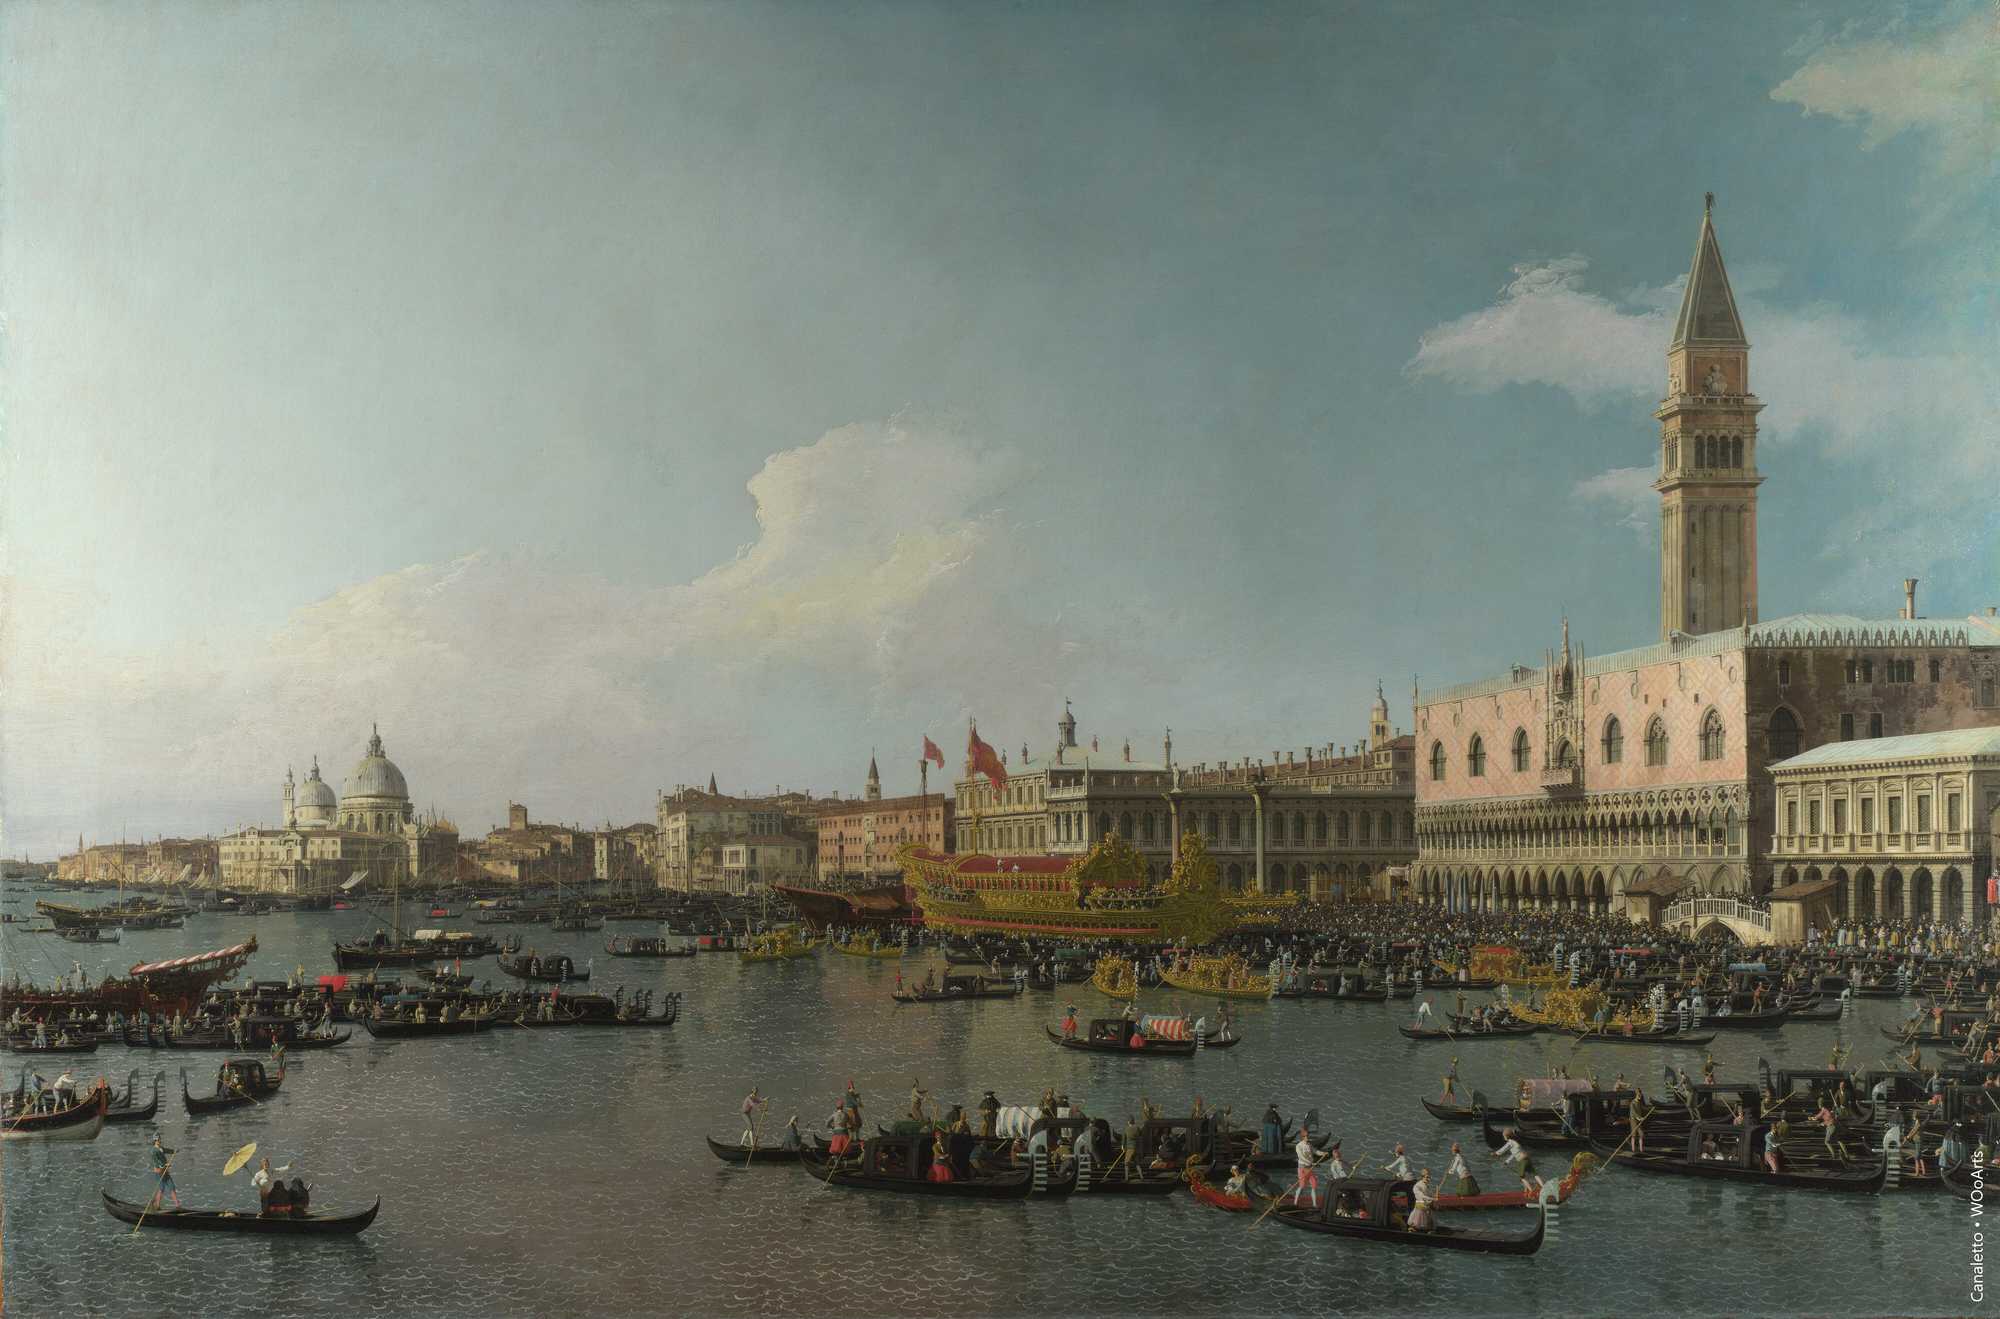 Painting by Canaletto